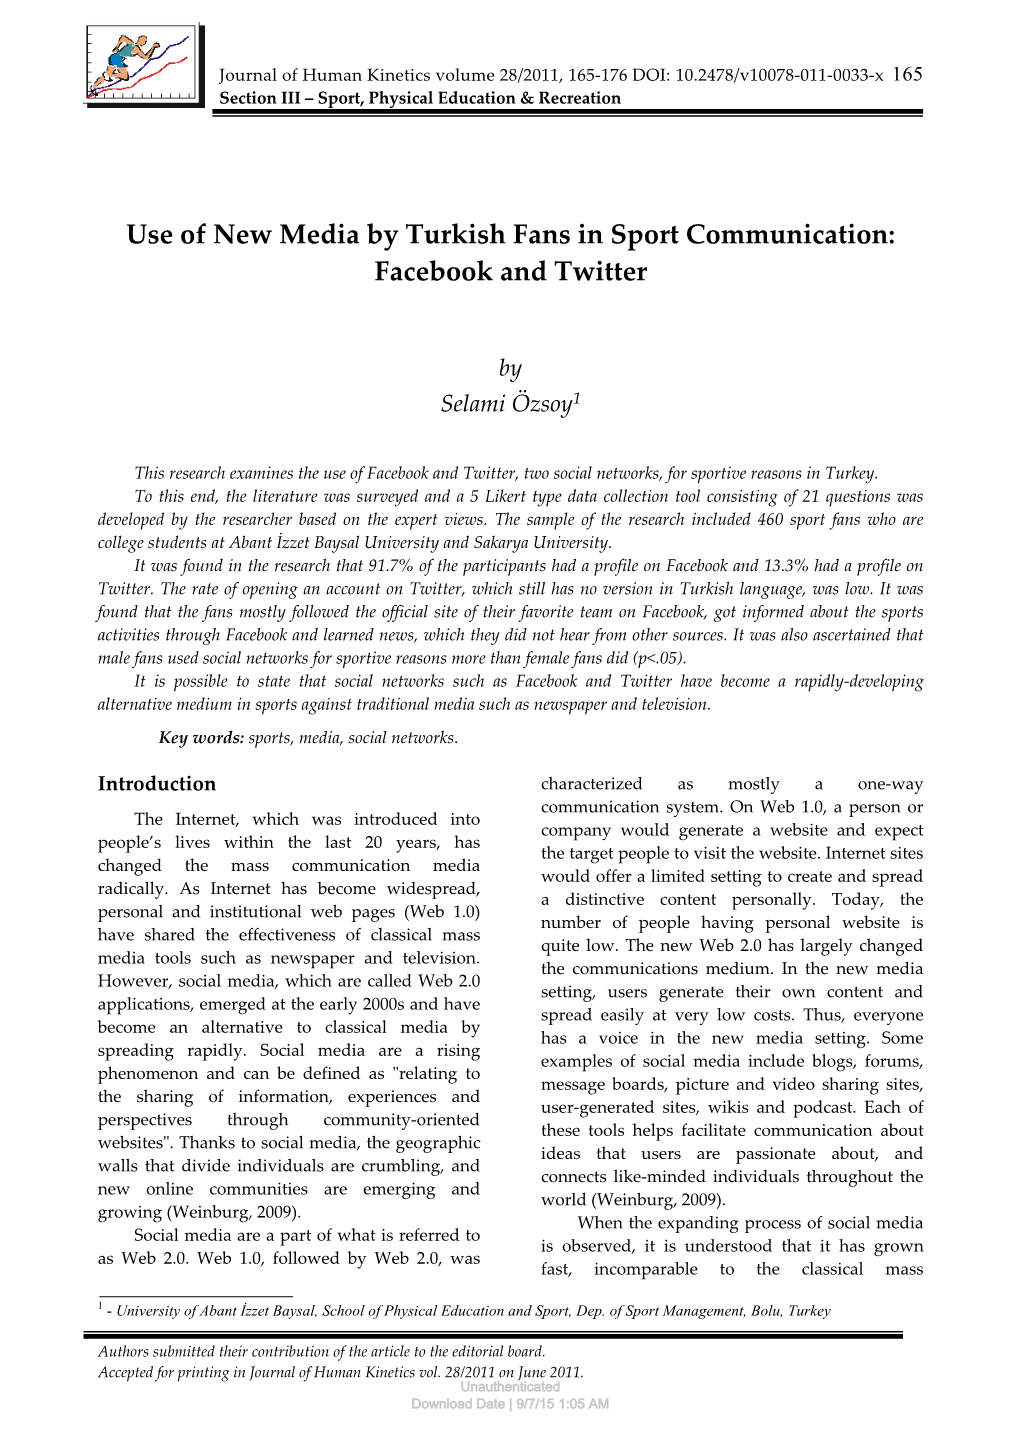 Use of New Media by Turkish Fans in Sport Communication: Facebook and Twitter